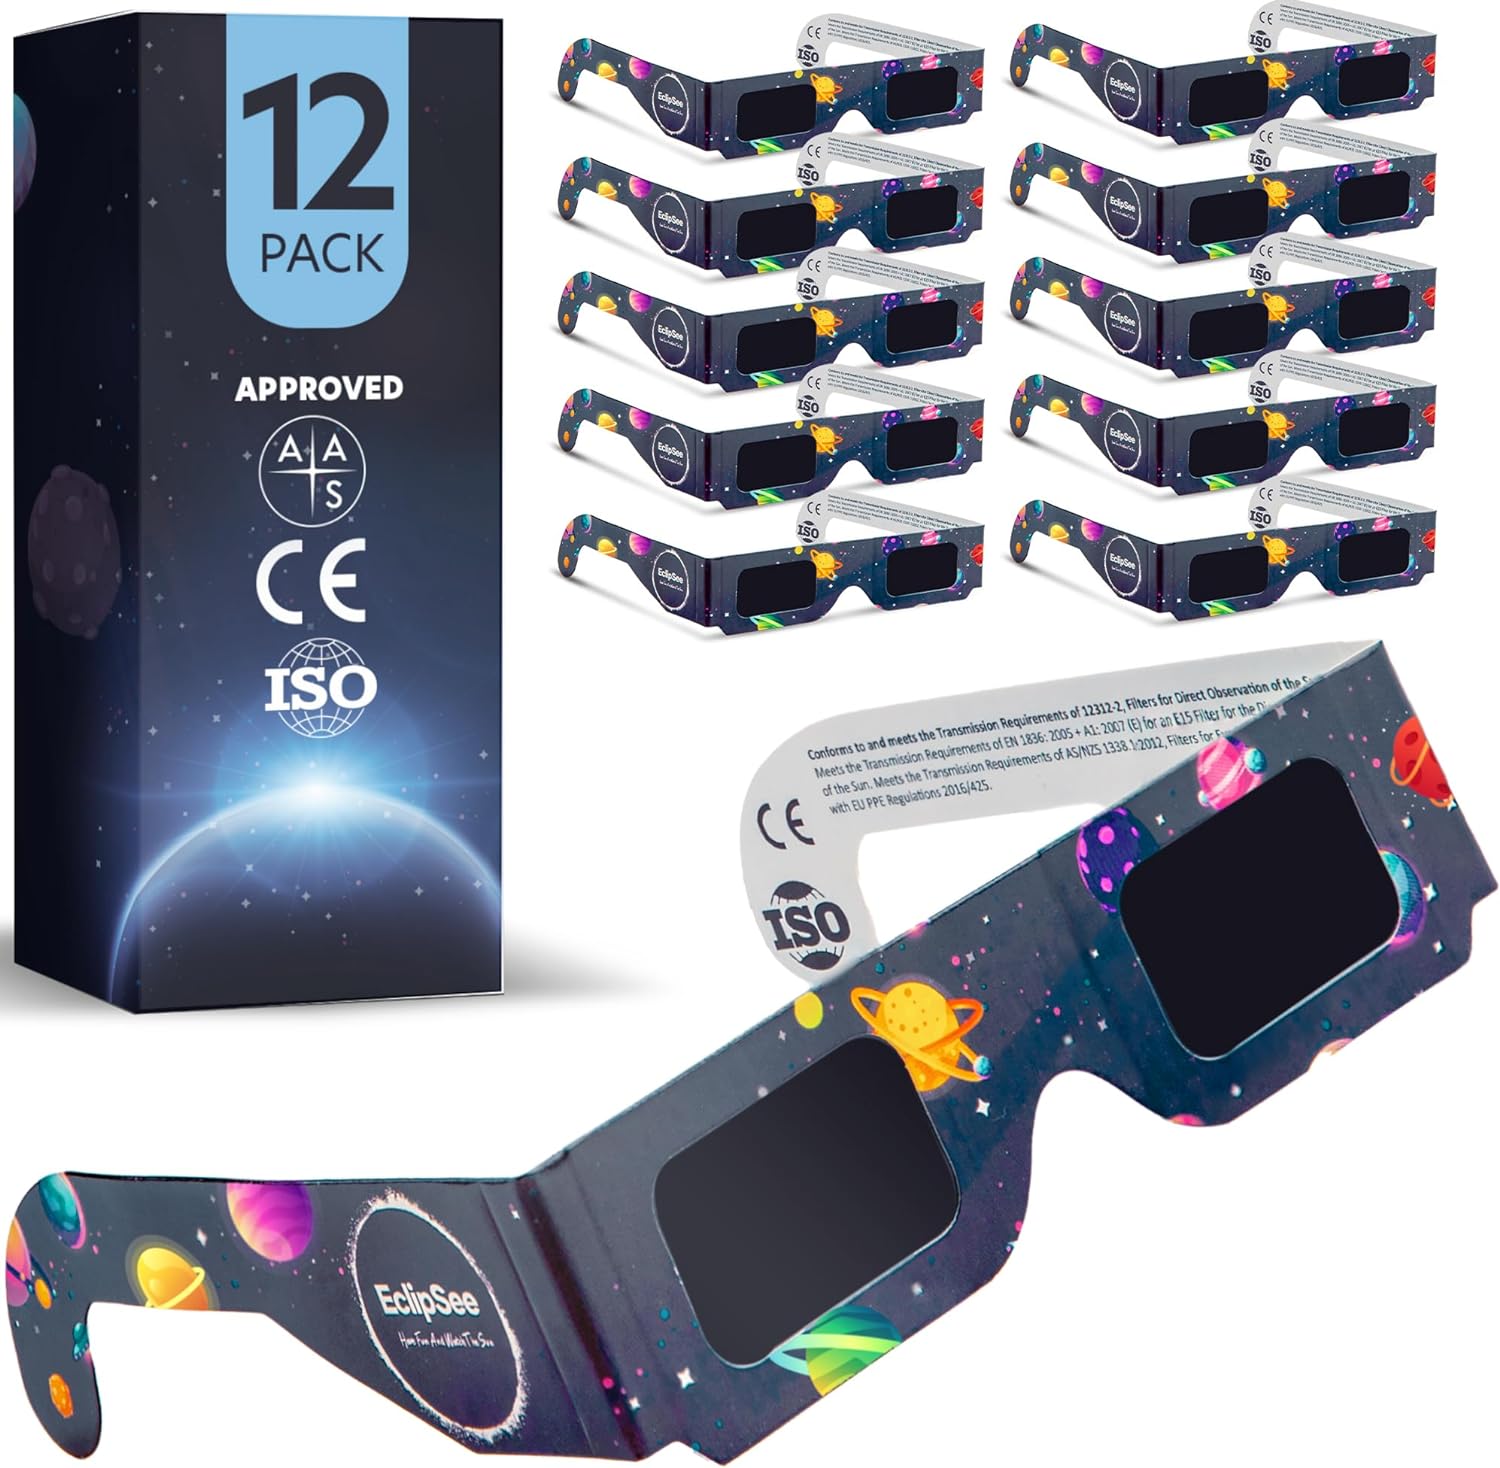 Limited-time deal: Eclipsee Solar Eclipse Glasses Approved 2024 (12 PACK) AAS, CE and ISO Certified, Safe Shades for Direct Sun Viewing - $7.00